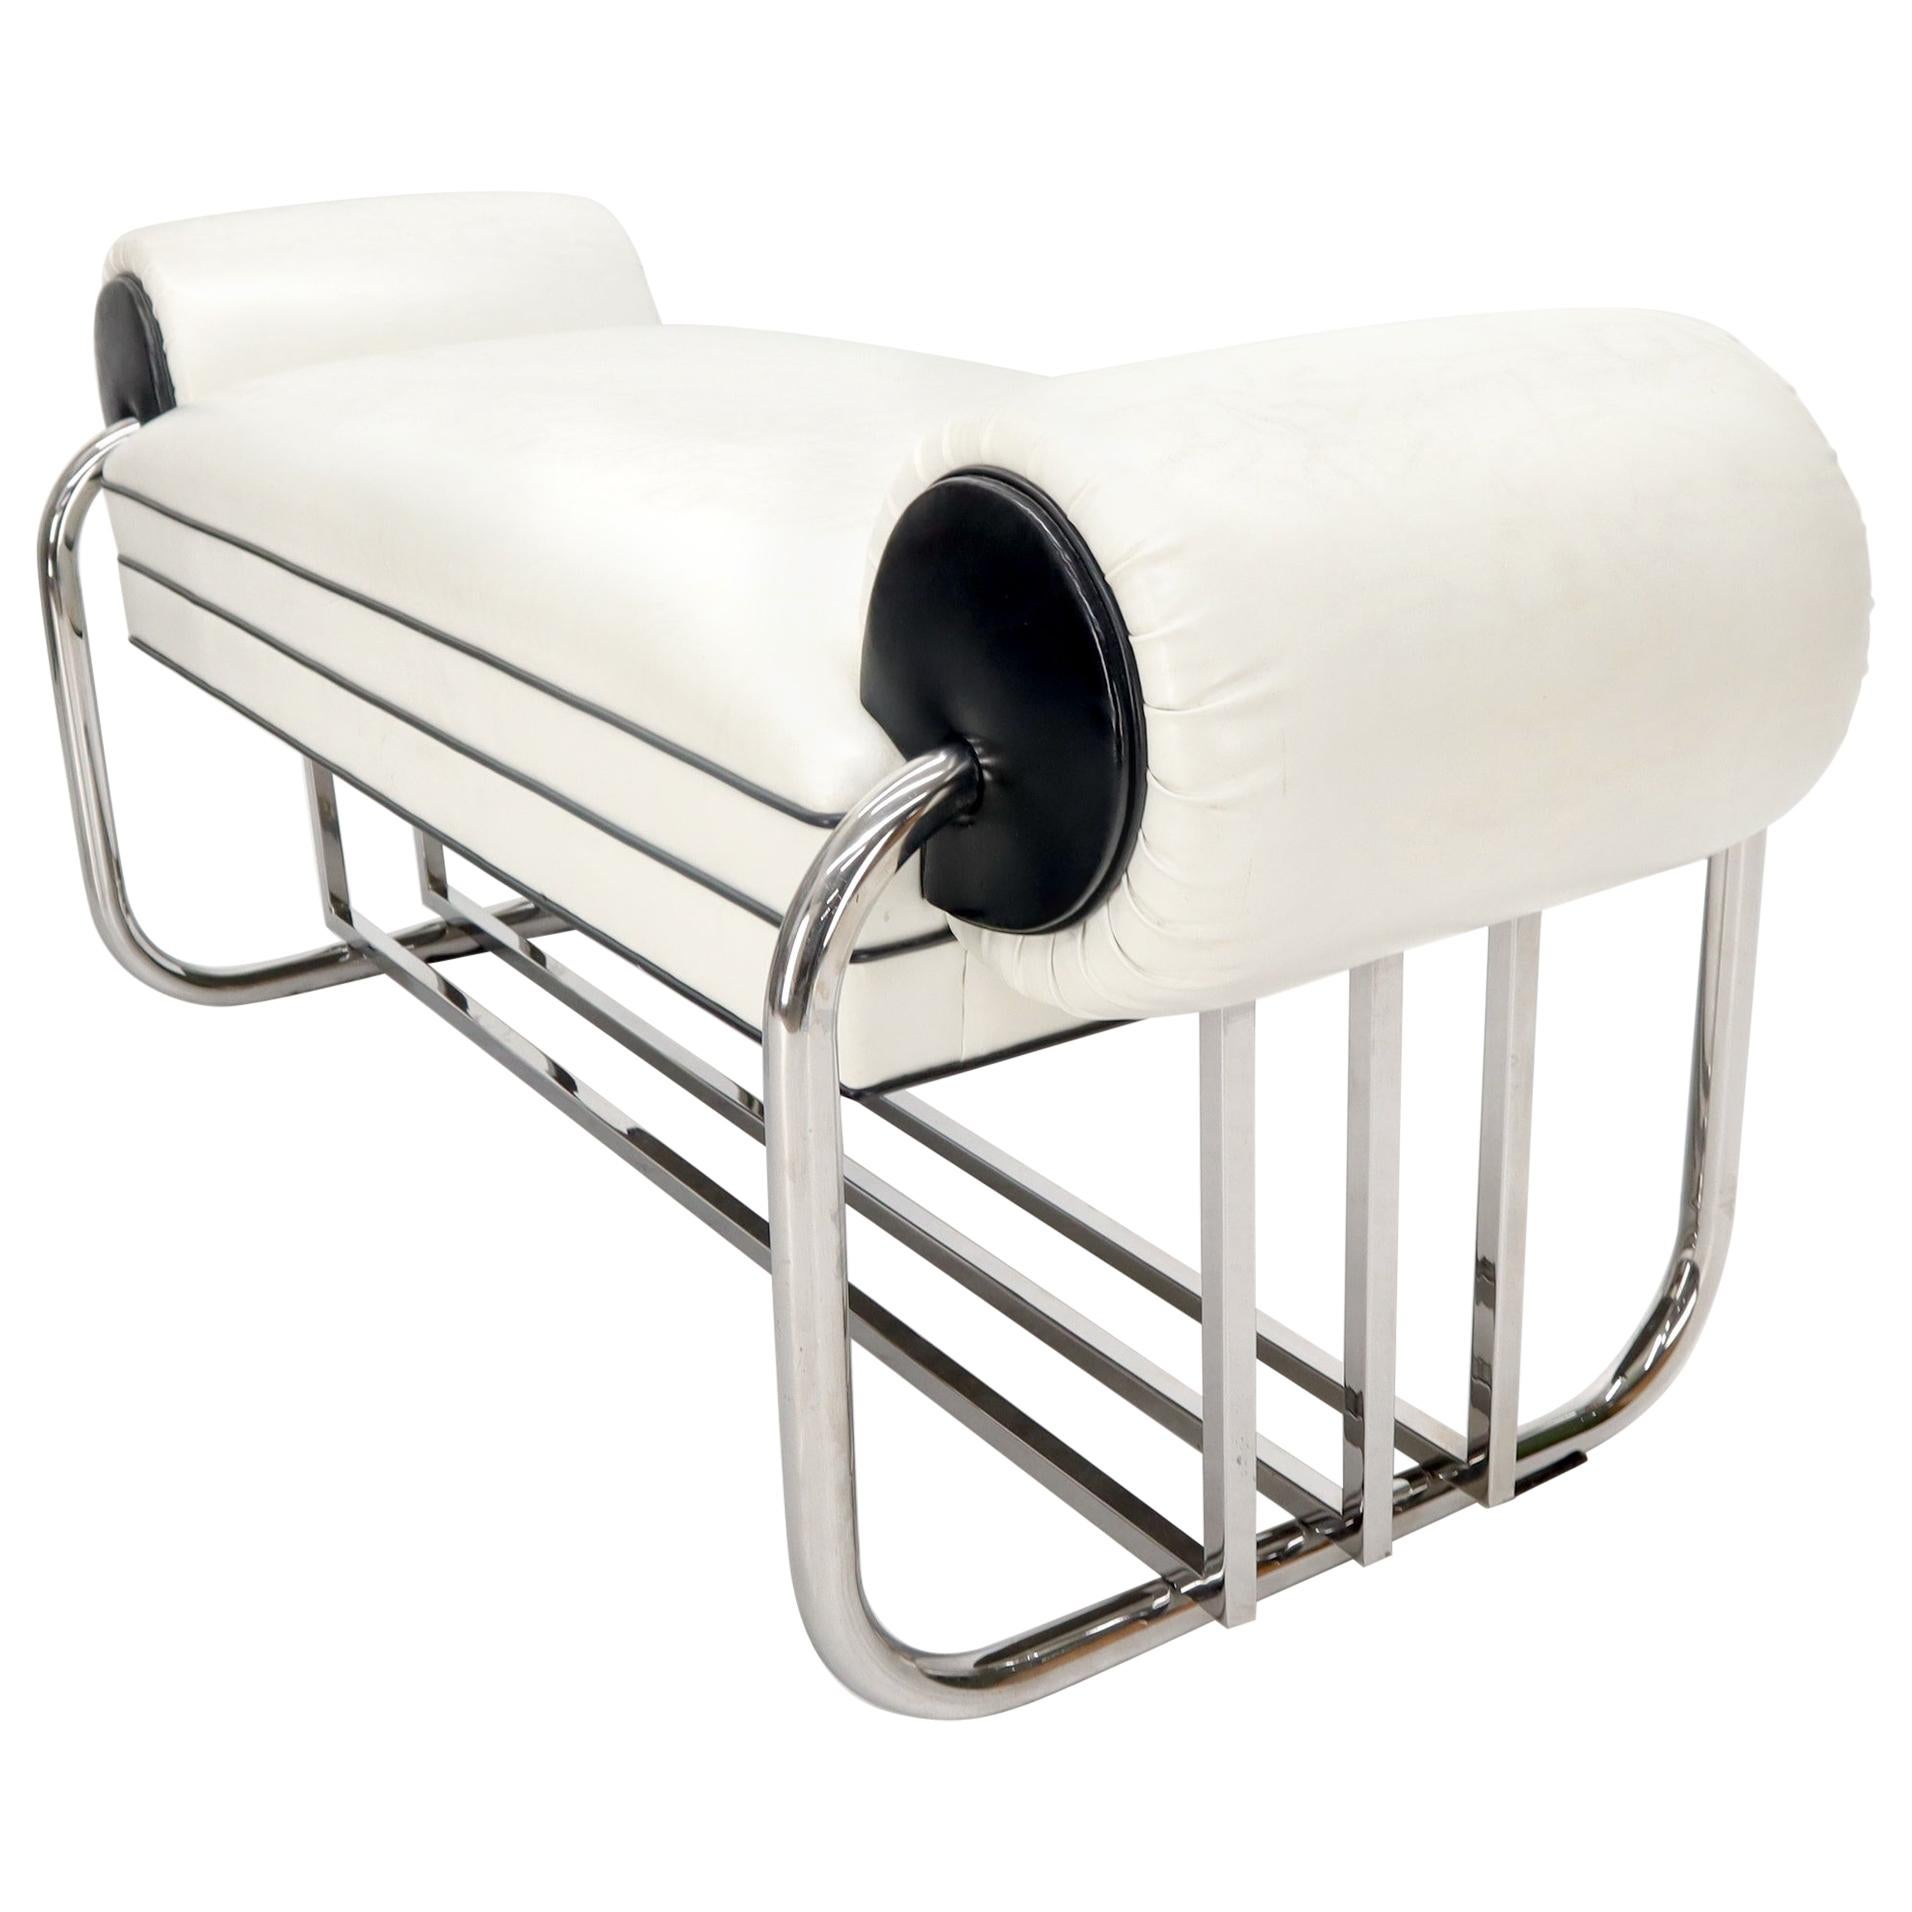 Bauhaus Chrome Bent Tube Black and White Upholstery Bench For Sale